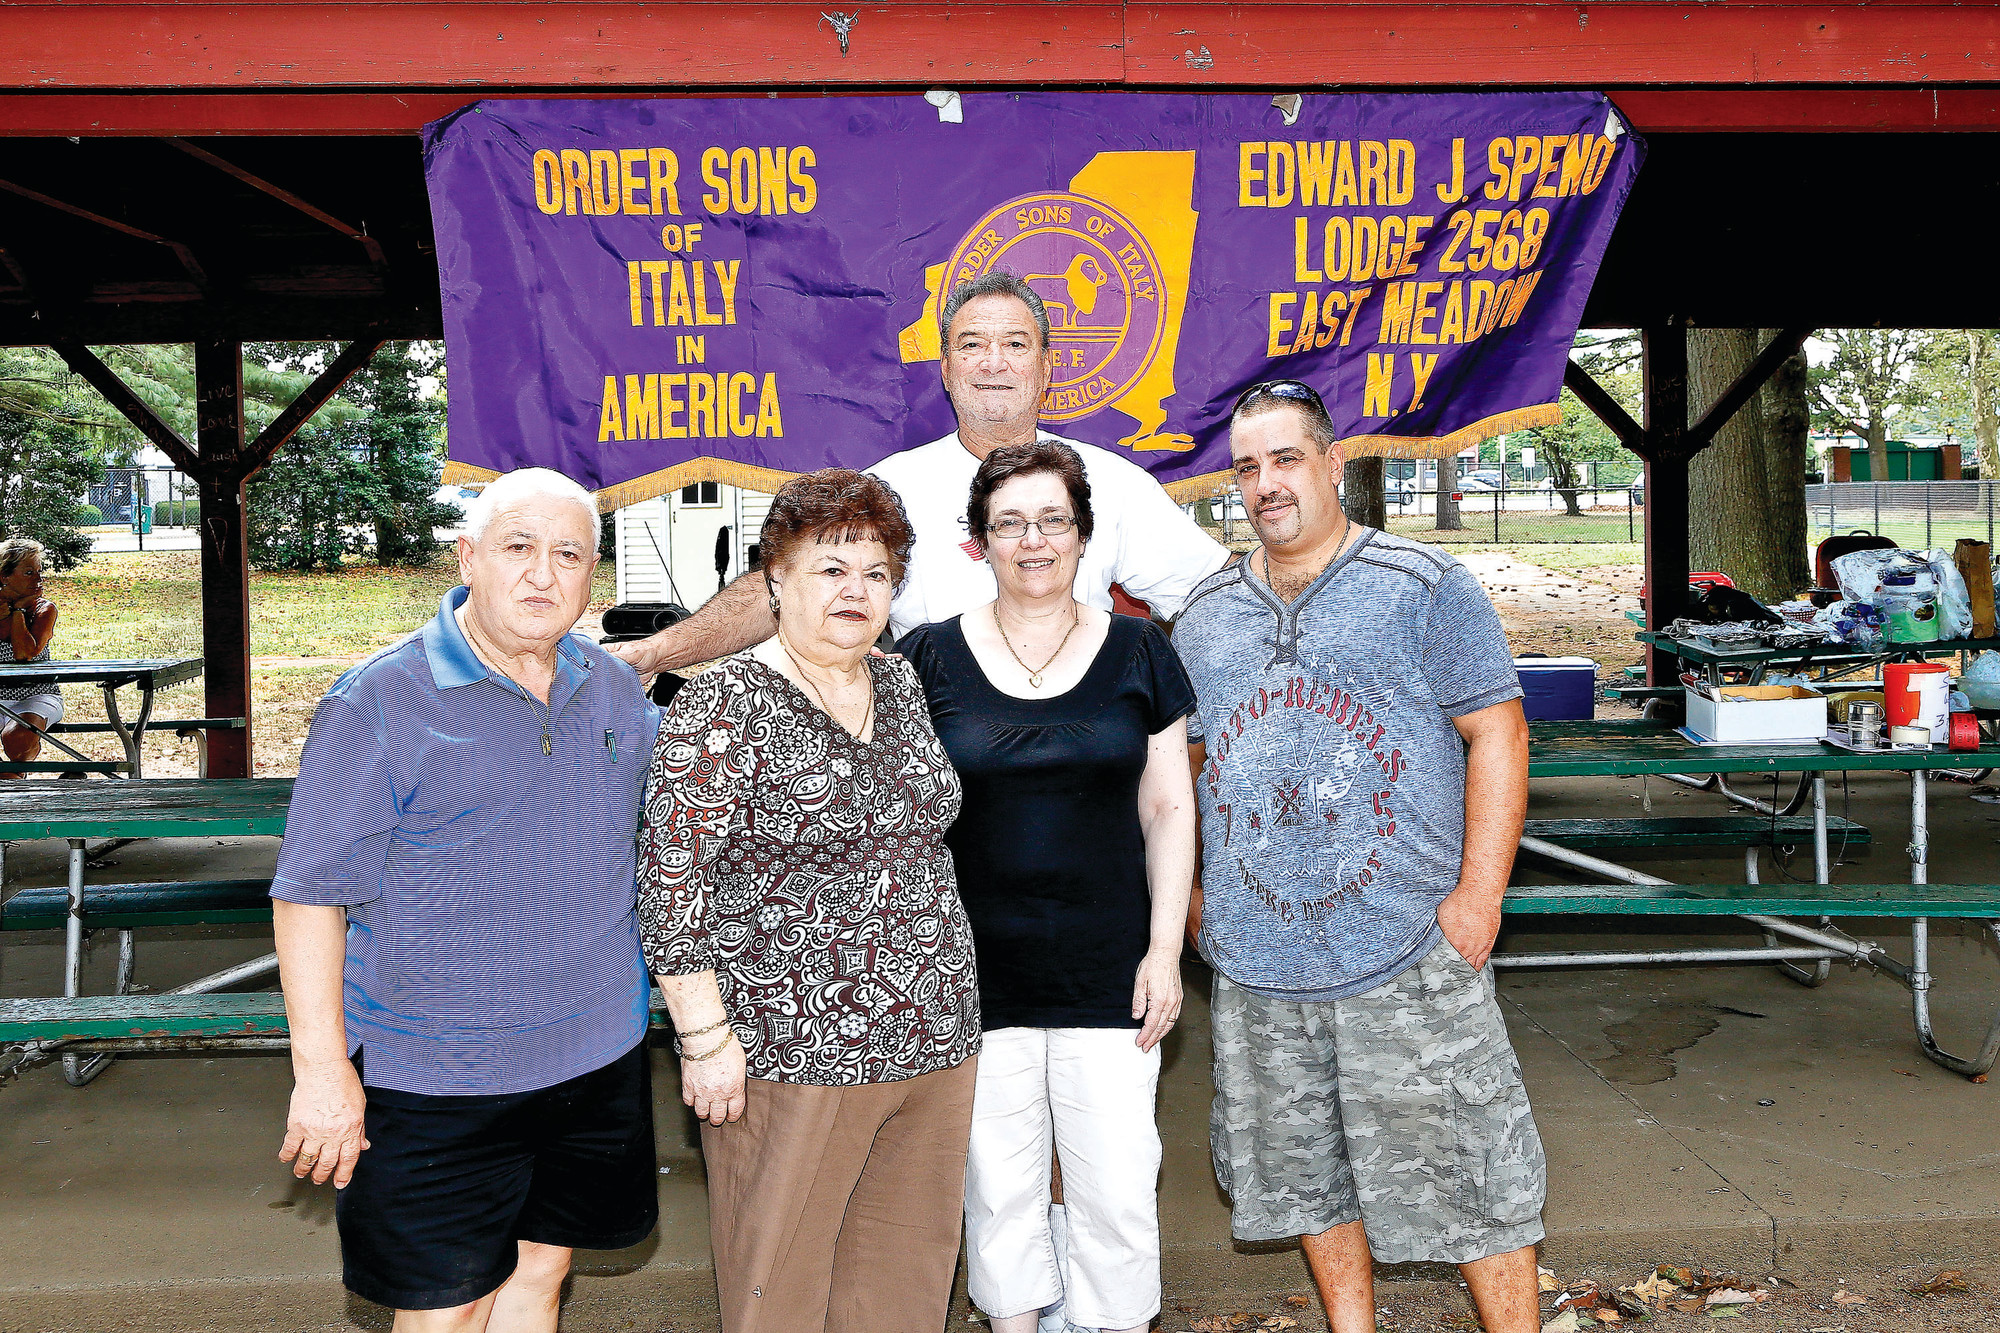 The Order Sons of Italy Edward J. Speno Lodge 2568, a community organization for 30 years, has disbanded due to declining memership. Pictured above, from left to right, are members Carmine Biscardi, his wife Anna, Eugene Masula, Carmen Suppa and Patrick Caliendo at a recent fundraiser.